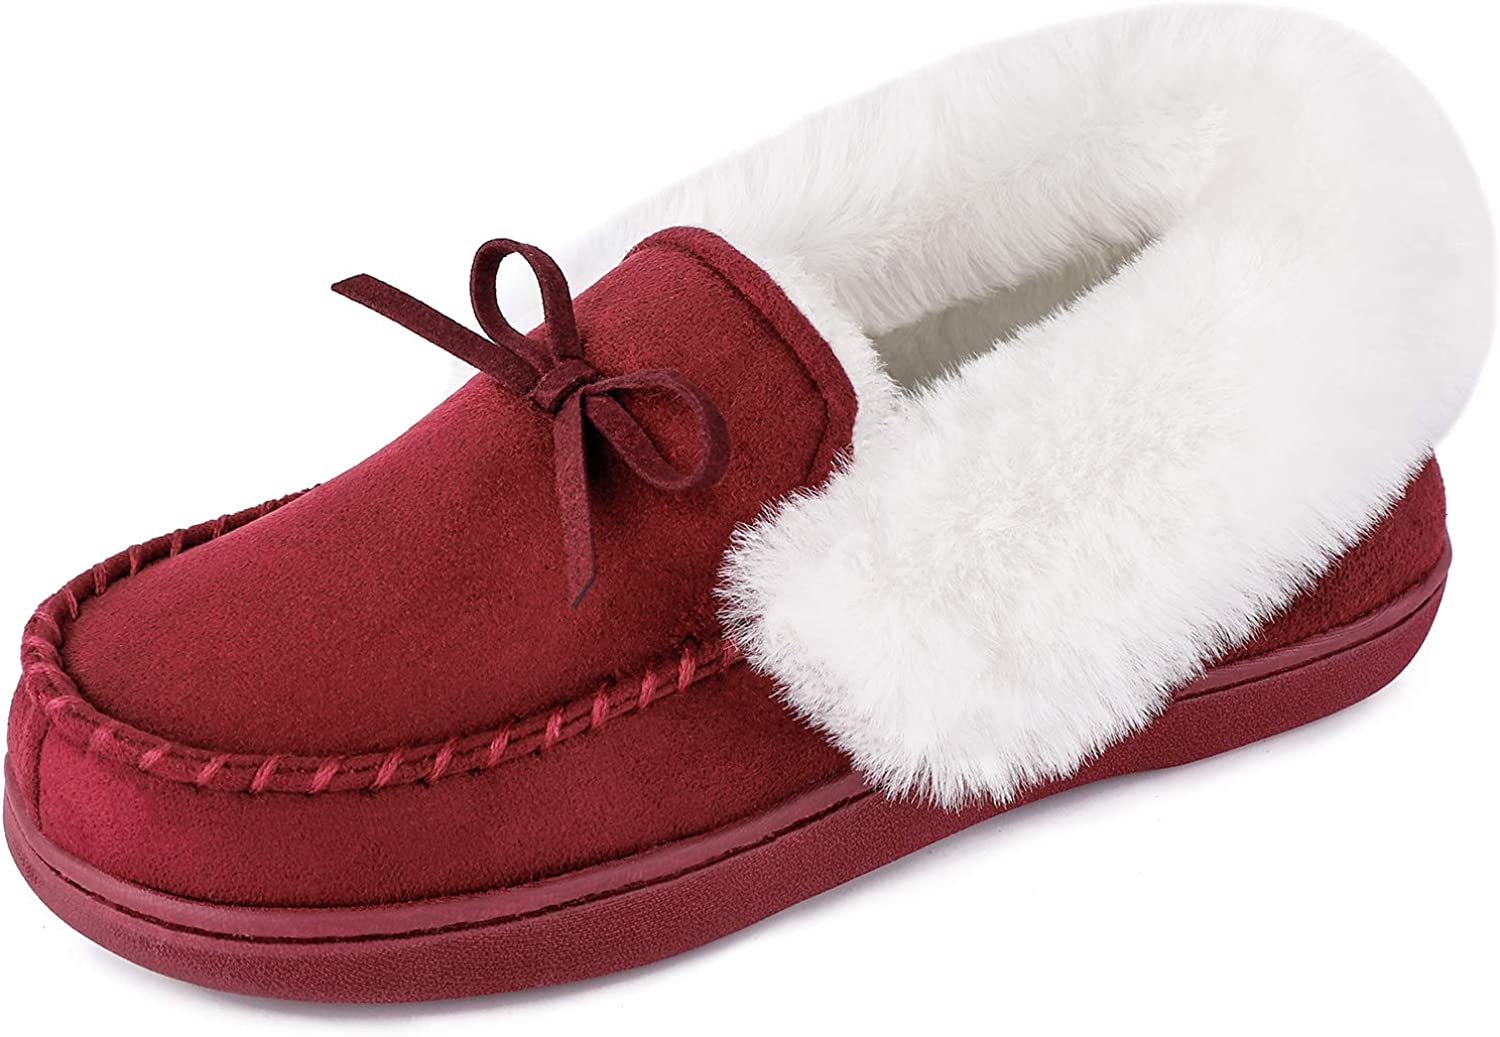 44) HomeIdeas Women's Faux Fur Lined Suede House Slippers